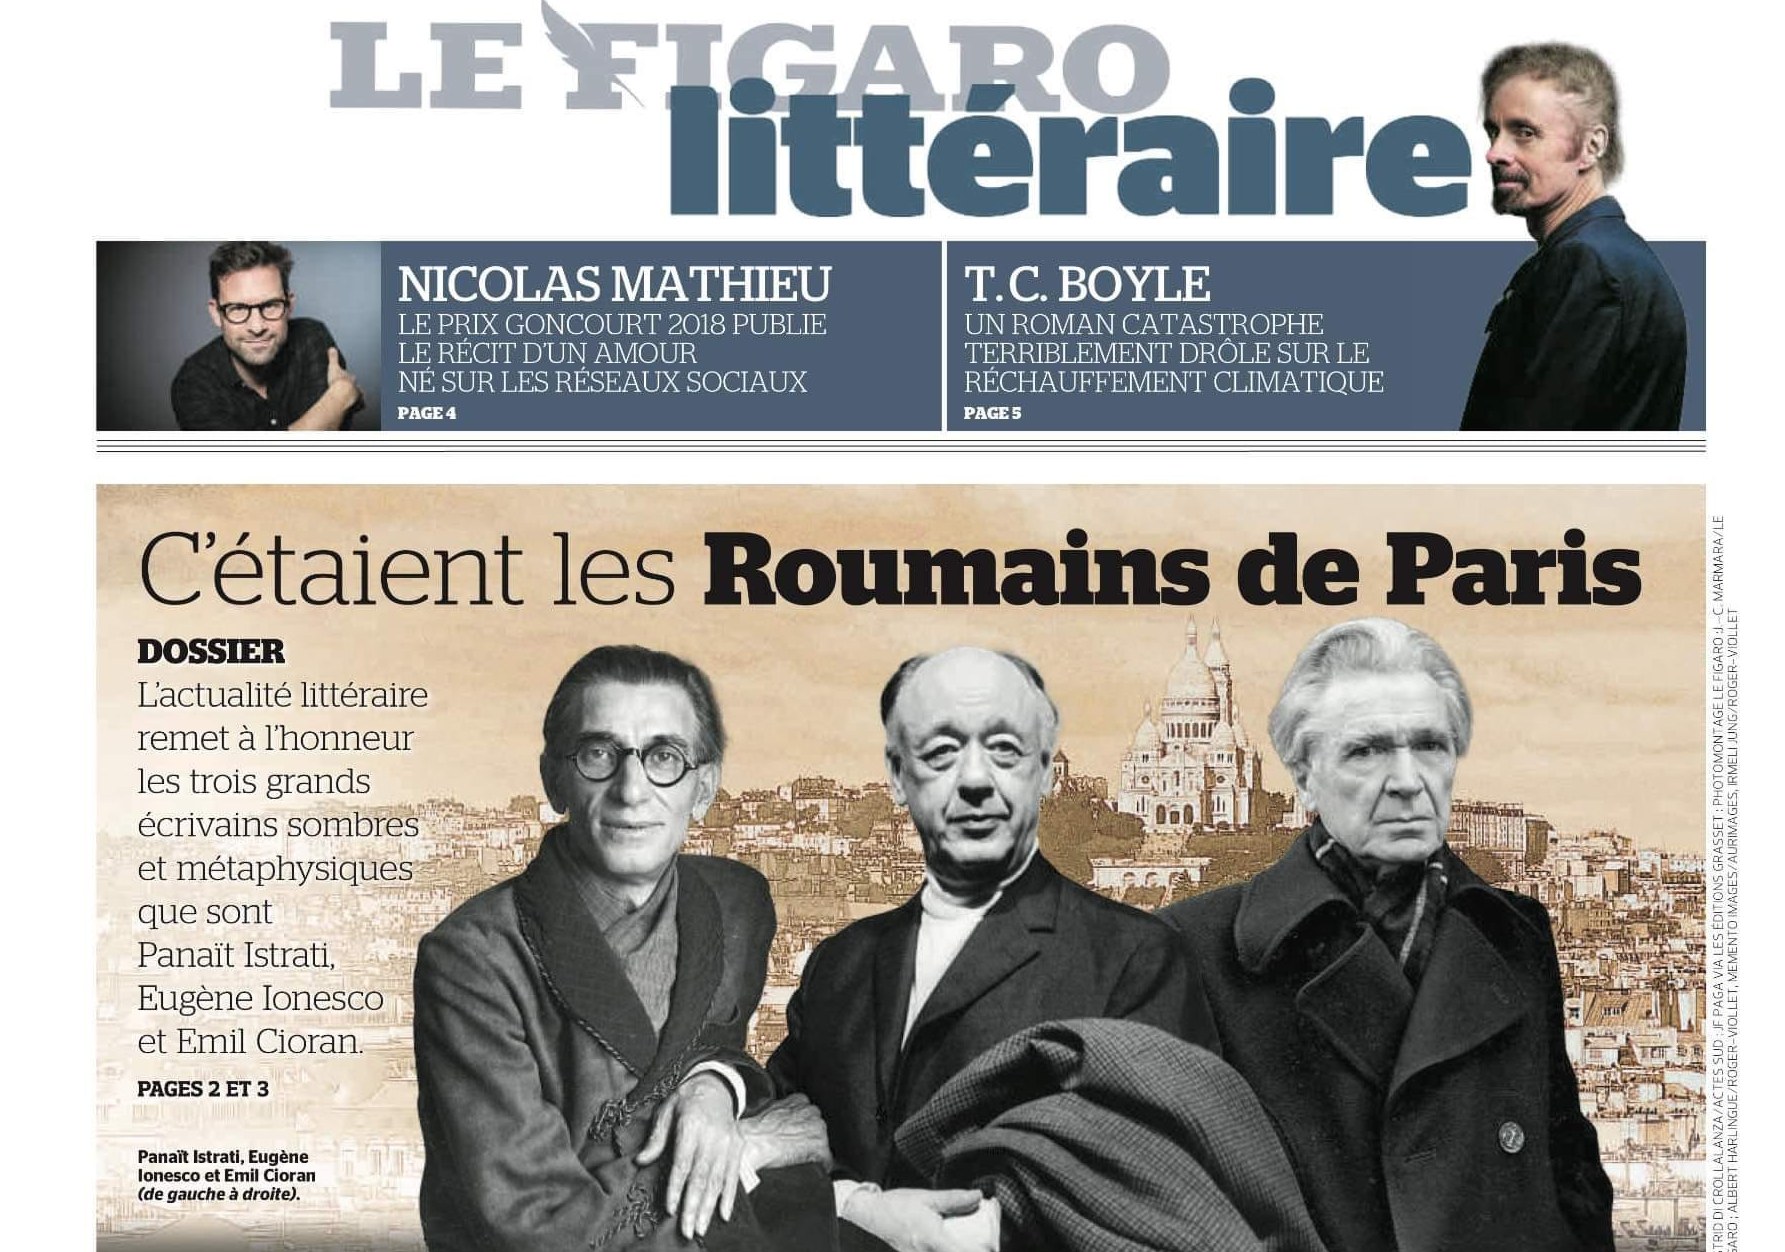 Le Figaro Littéraire dedicates the front page to three famous Romanian writers